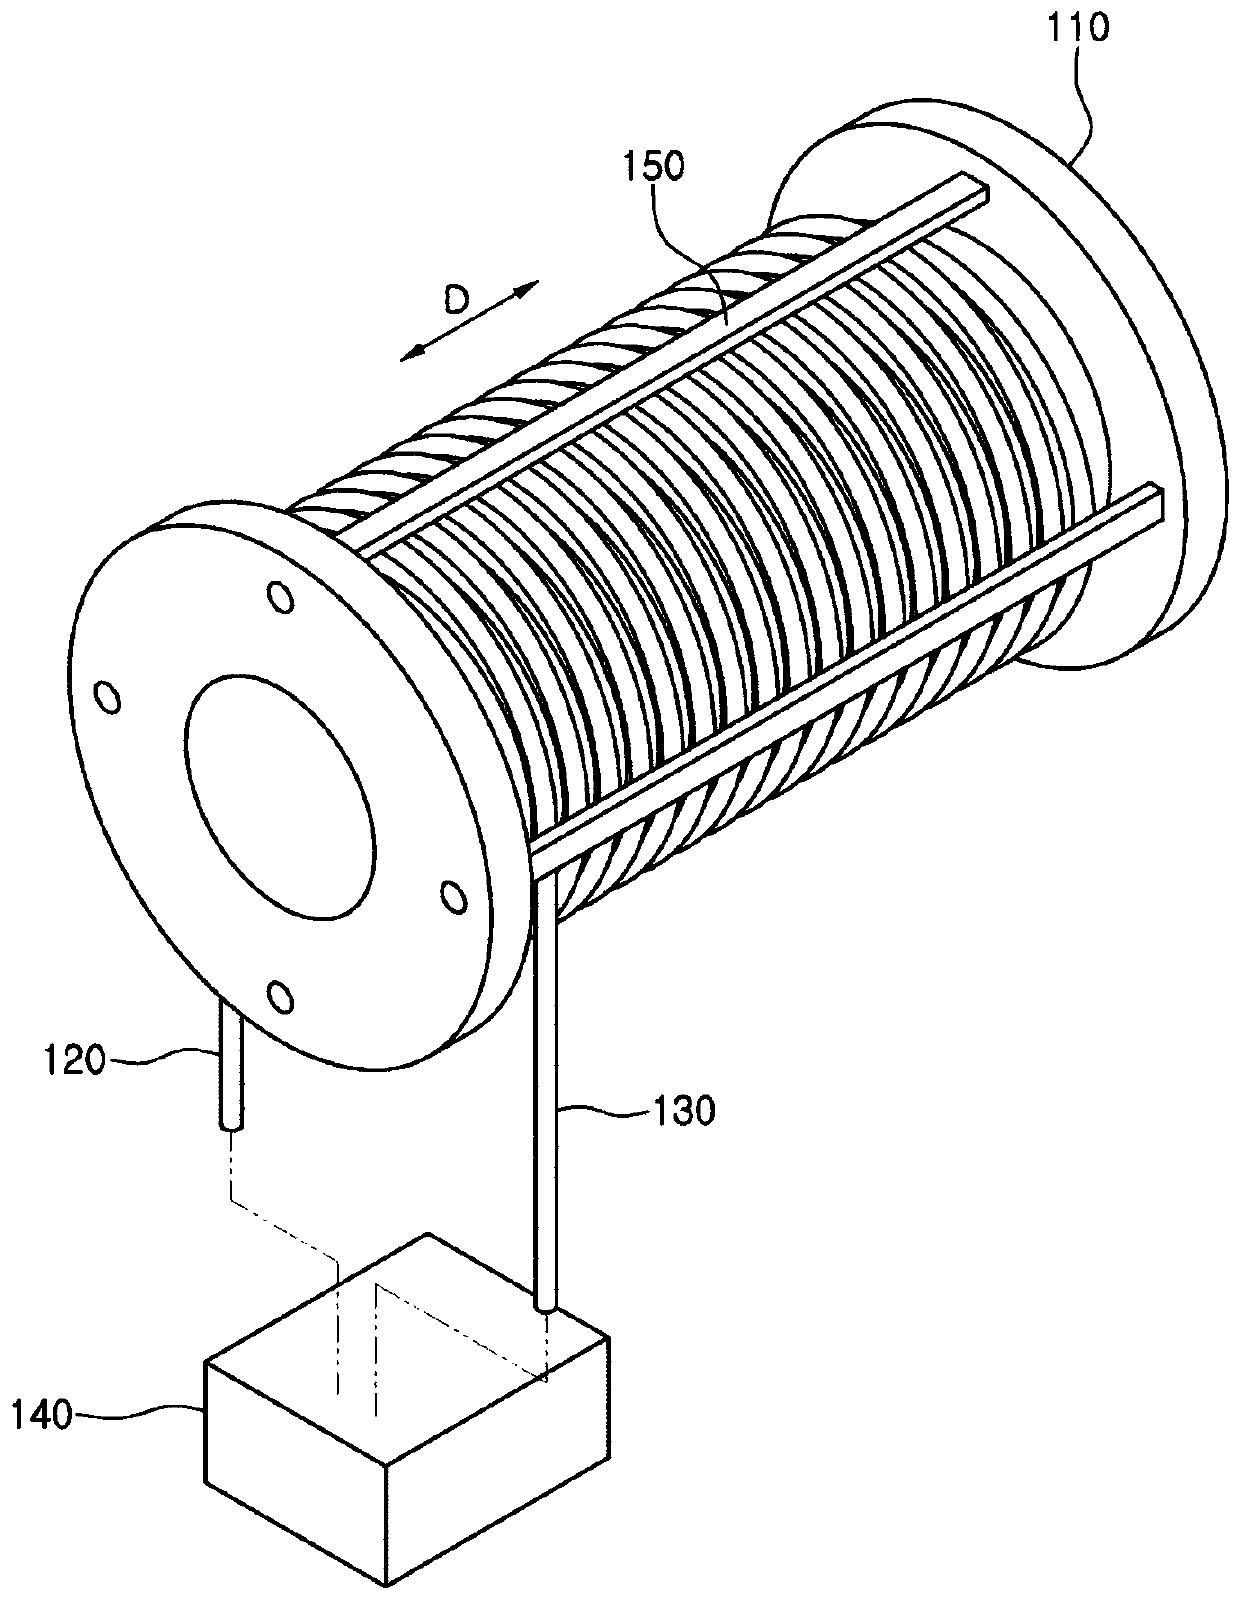 Apparatus for preventing corrosion inside steel pipe by using electromagnetic field